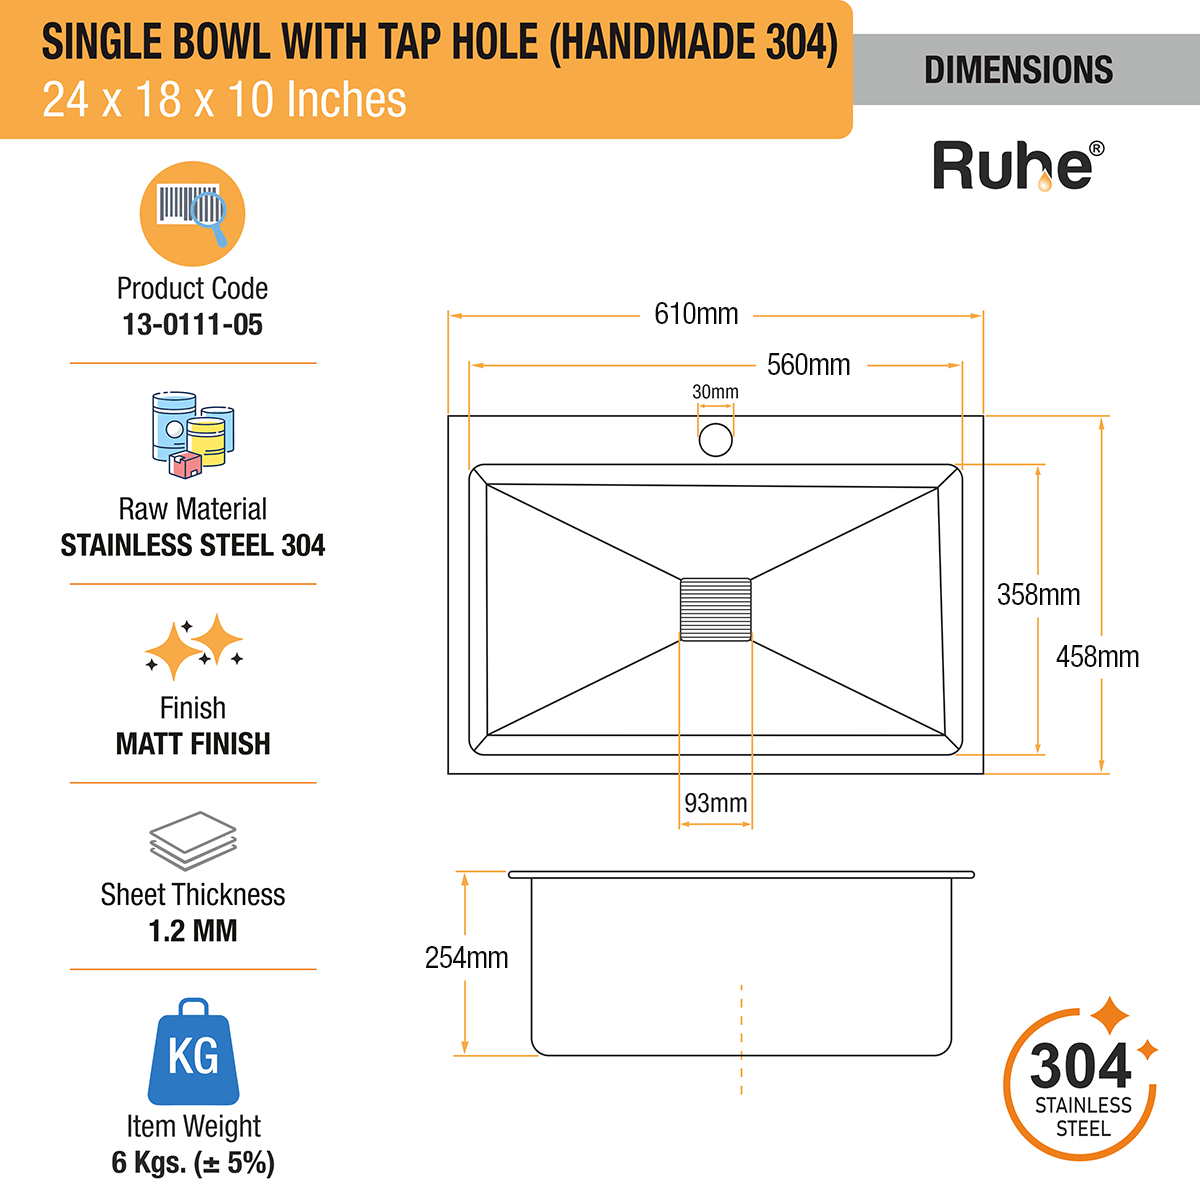 Handmade Single Bowl 304-Grade Kitchen Sink (24 x 18 x 10 Inches) with Tap Hole dimensions and sizes